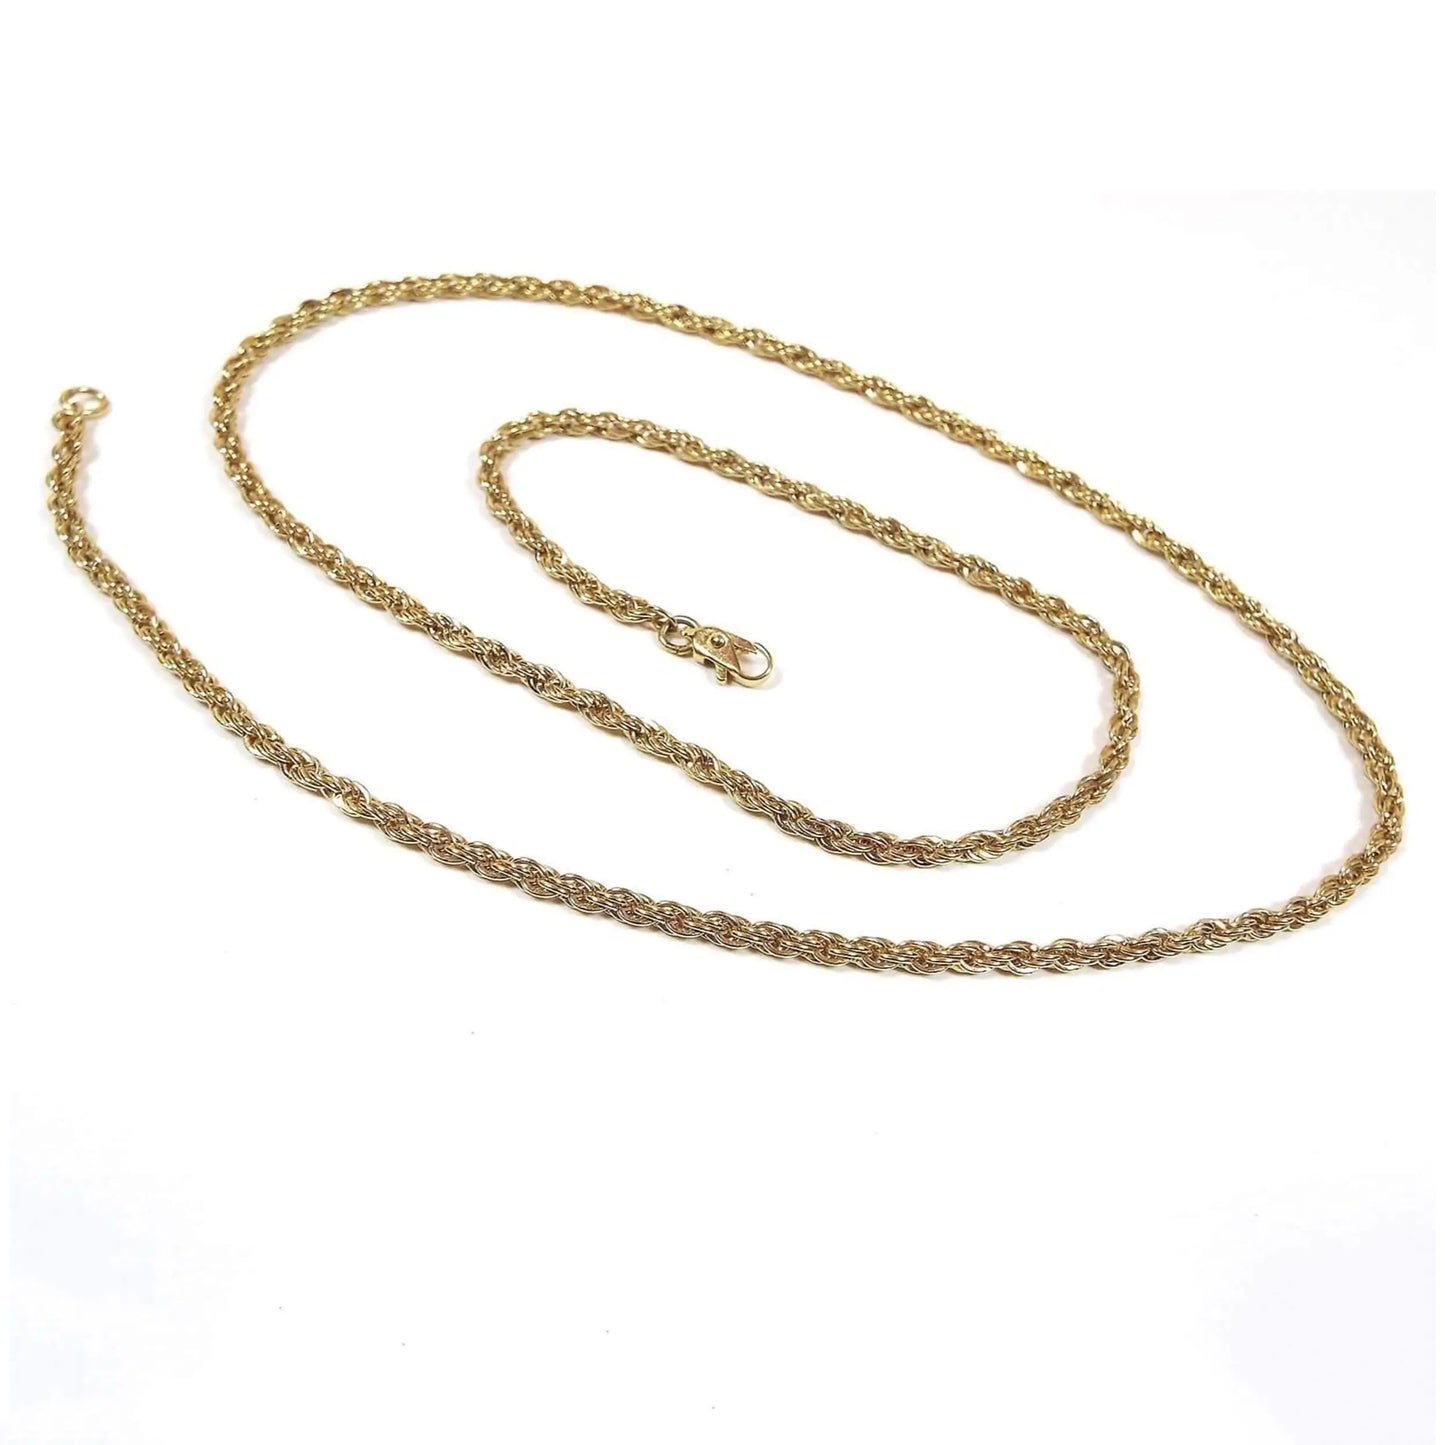 Top view of the retro vintage chain necklace. The metal is gold tone in color. It has a rope chain design with a small lobster claw clasp on the end.